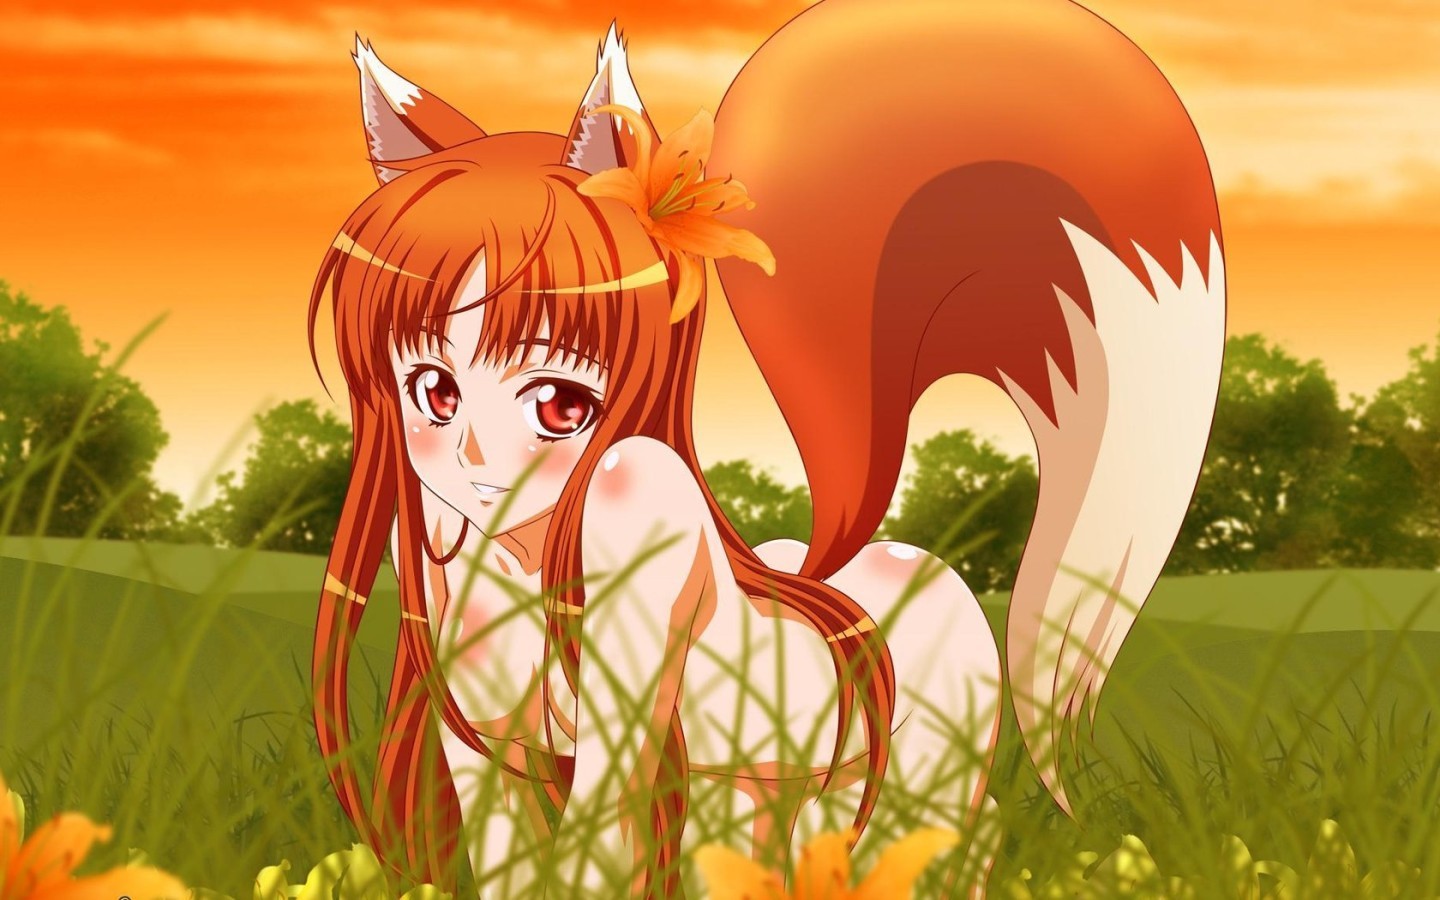 Wolf Girl Naked Toon Girls - nude, anime girls, anime, wolf girls, Holo, Spice and Wolf - wallpaper  #159527 (1440x900px) on Wallls.com